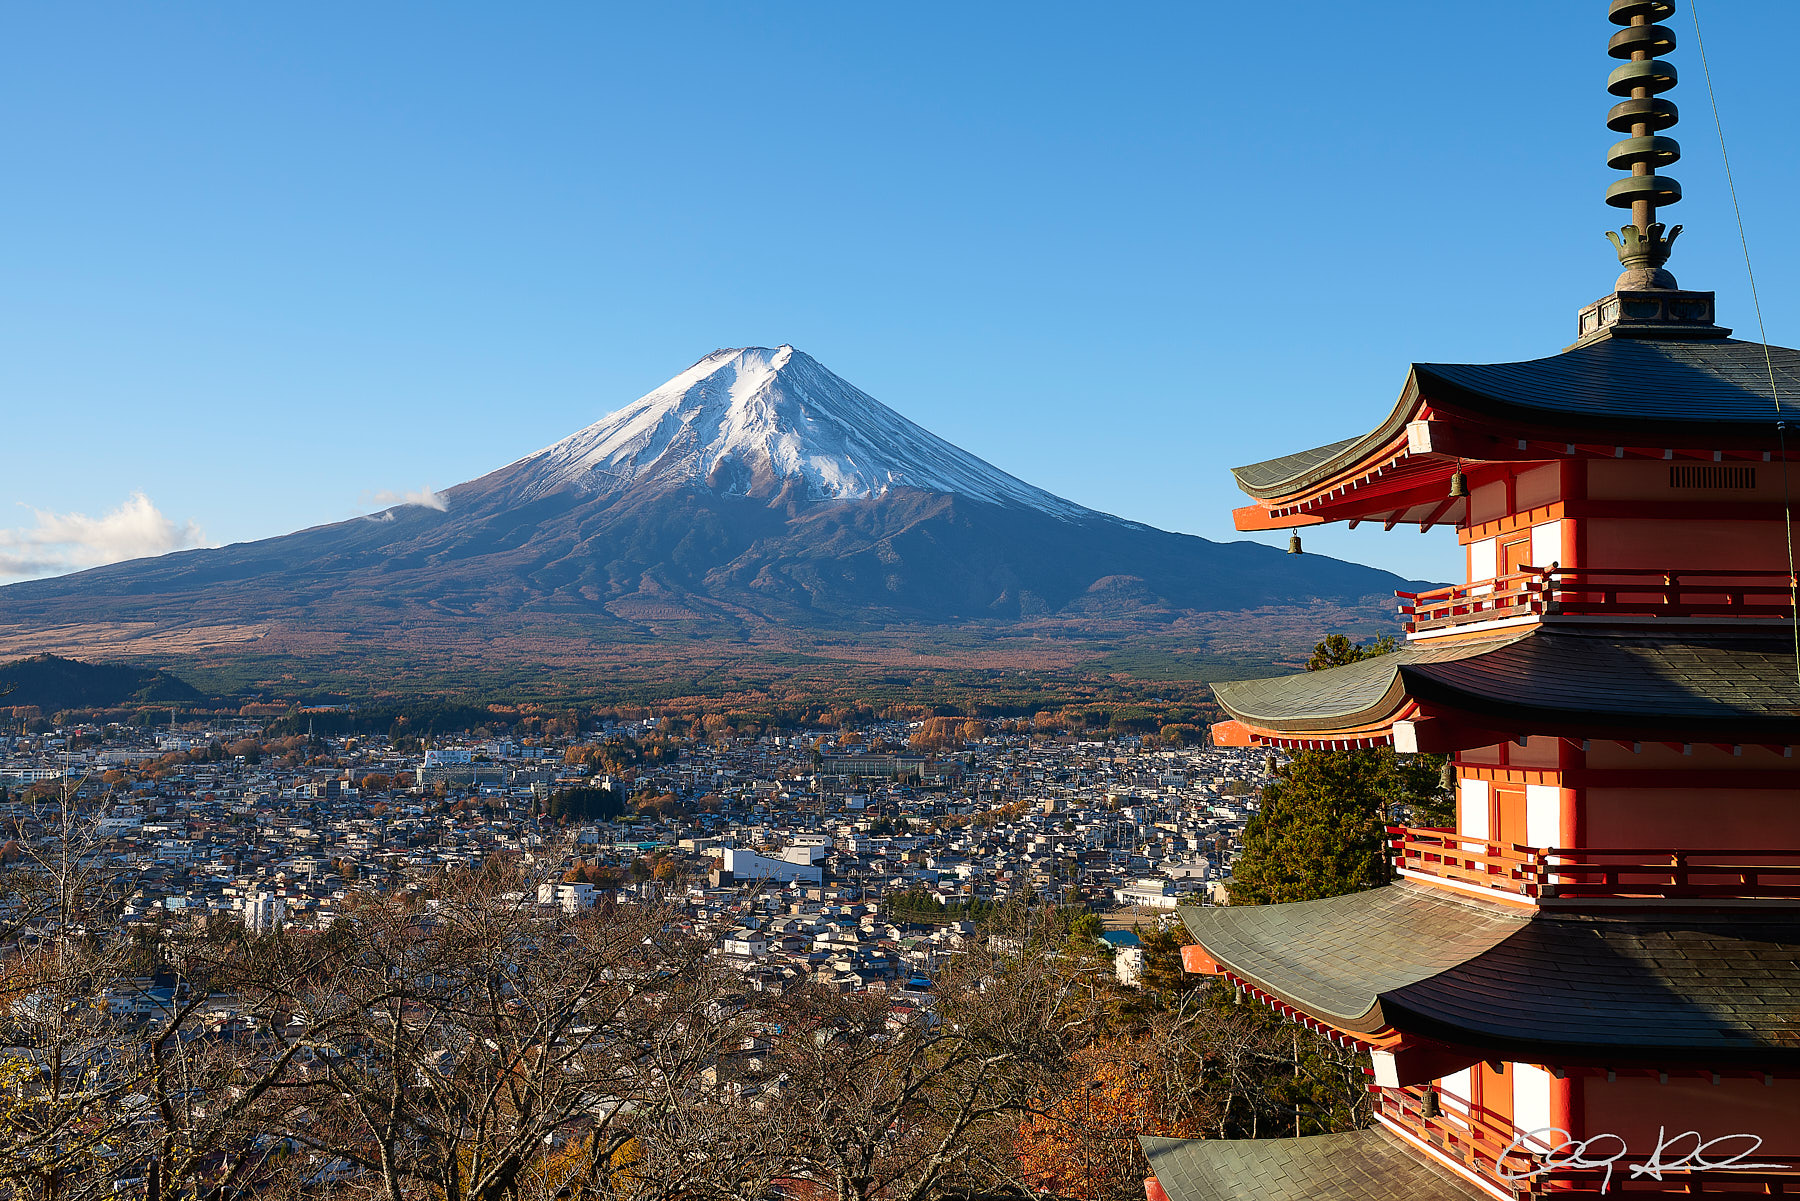 morning view of the Chureito Pagoda and snow covered Mount Fuji in the background